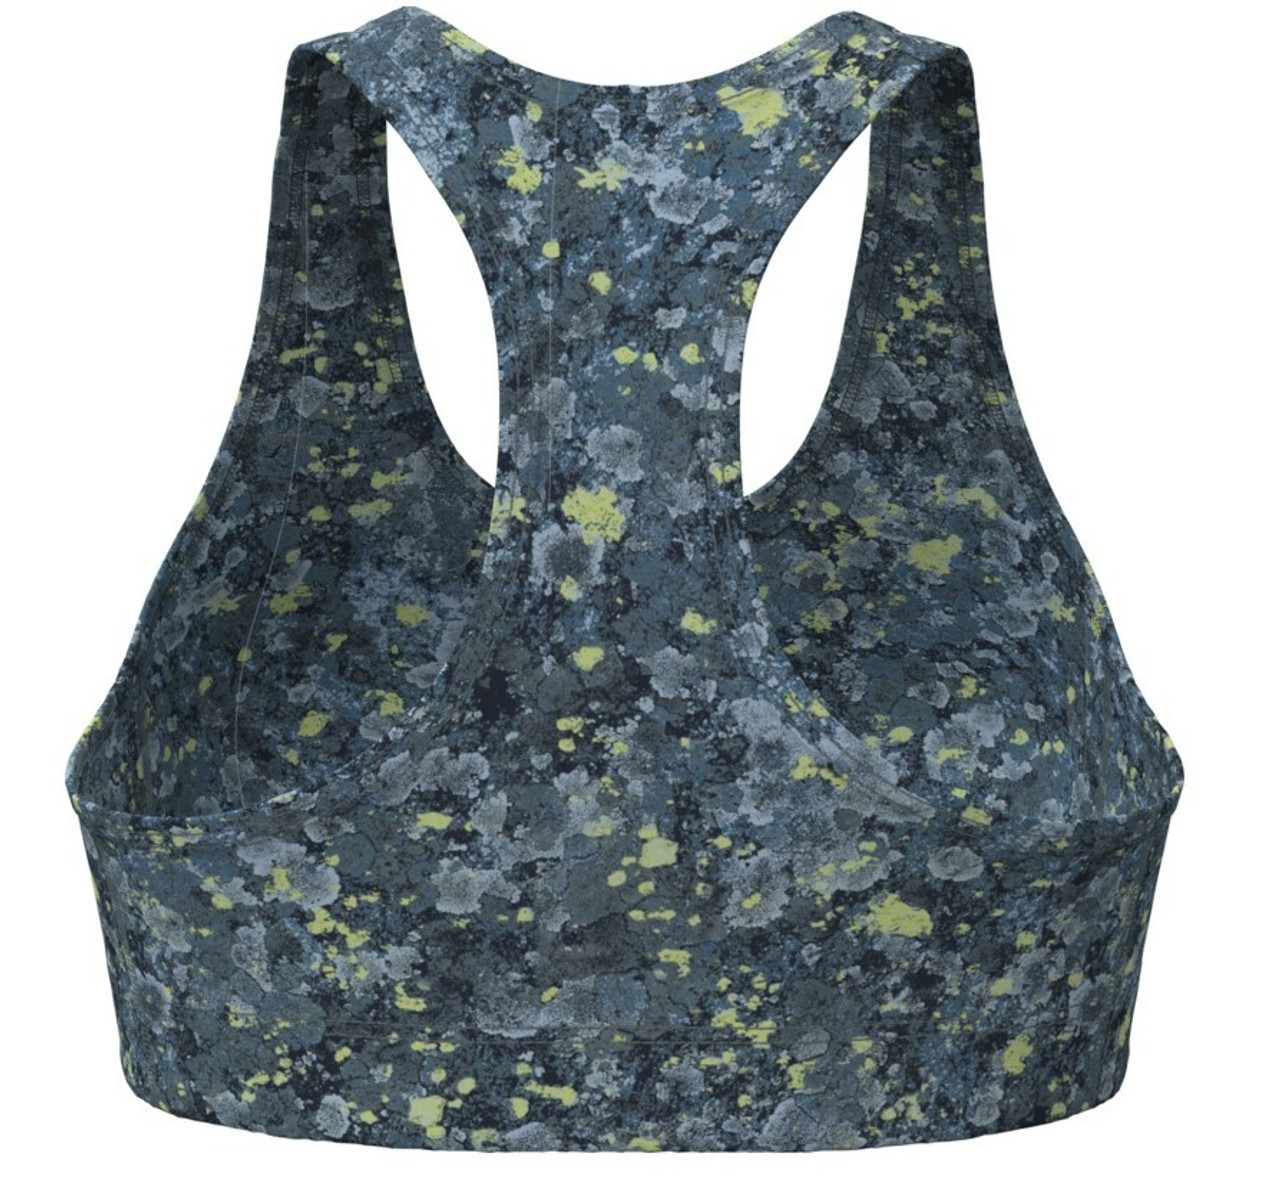 The North Face Womens Printed Midline Bra